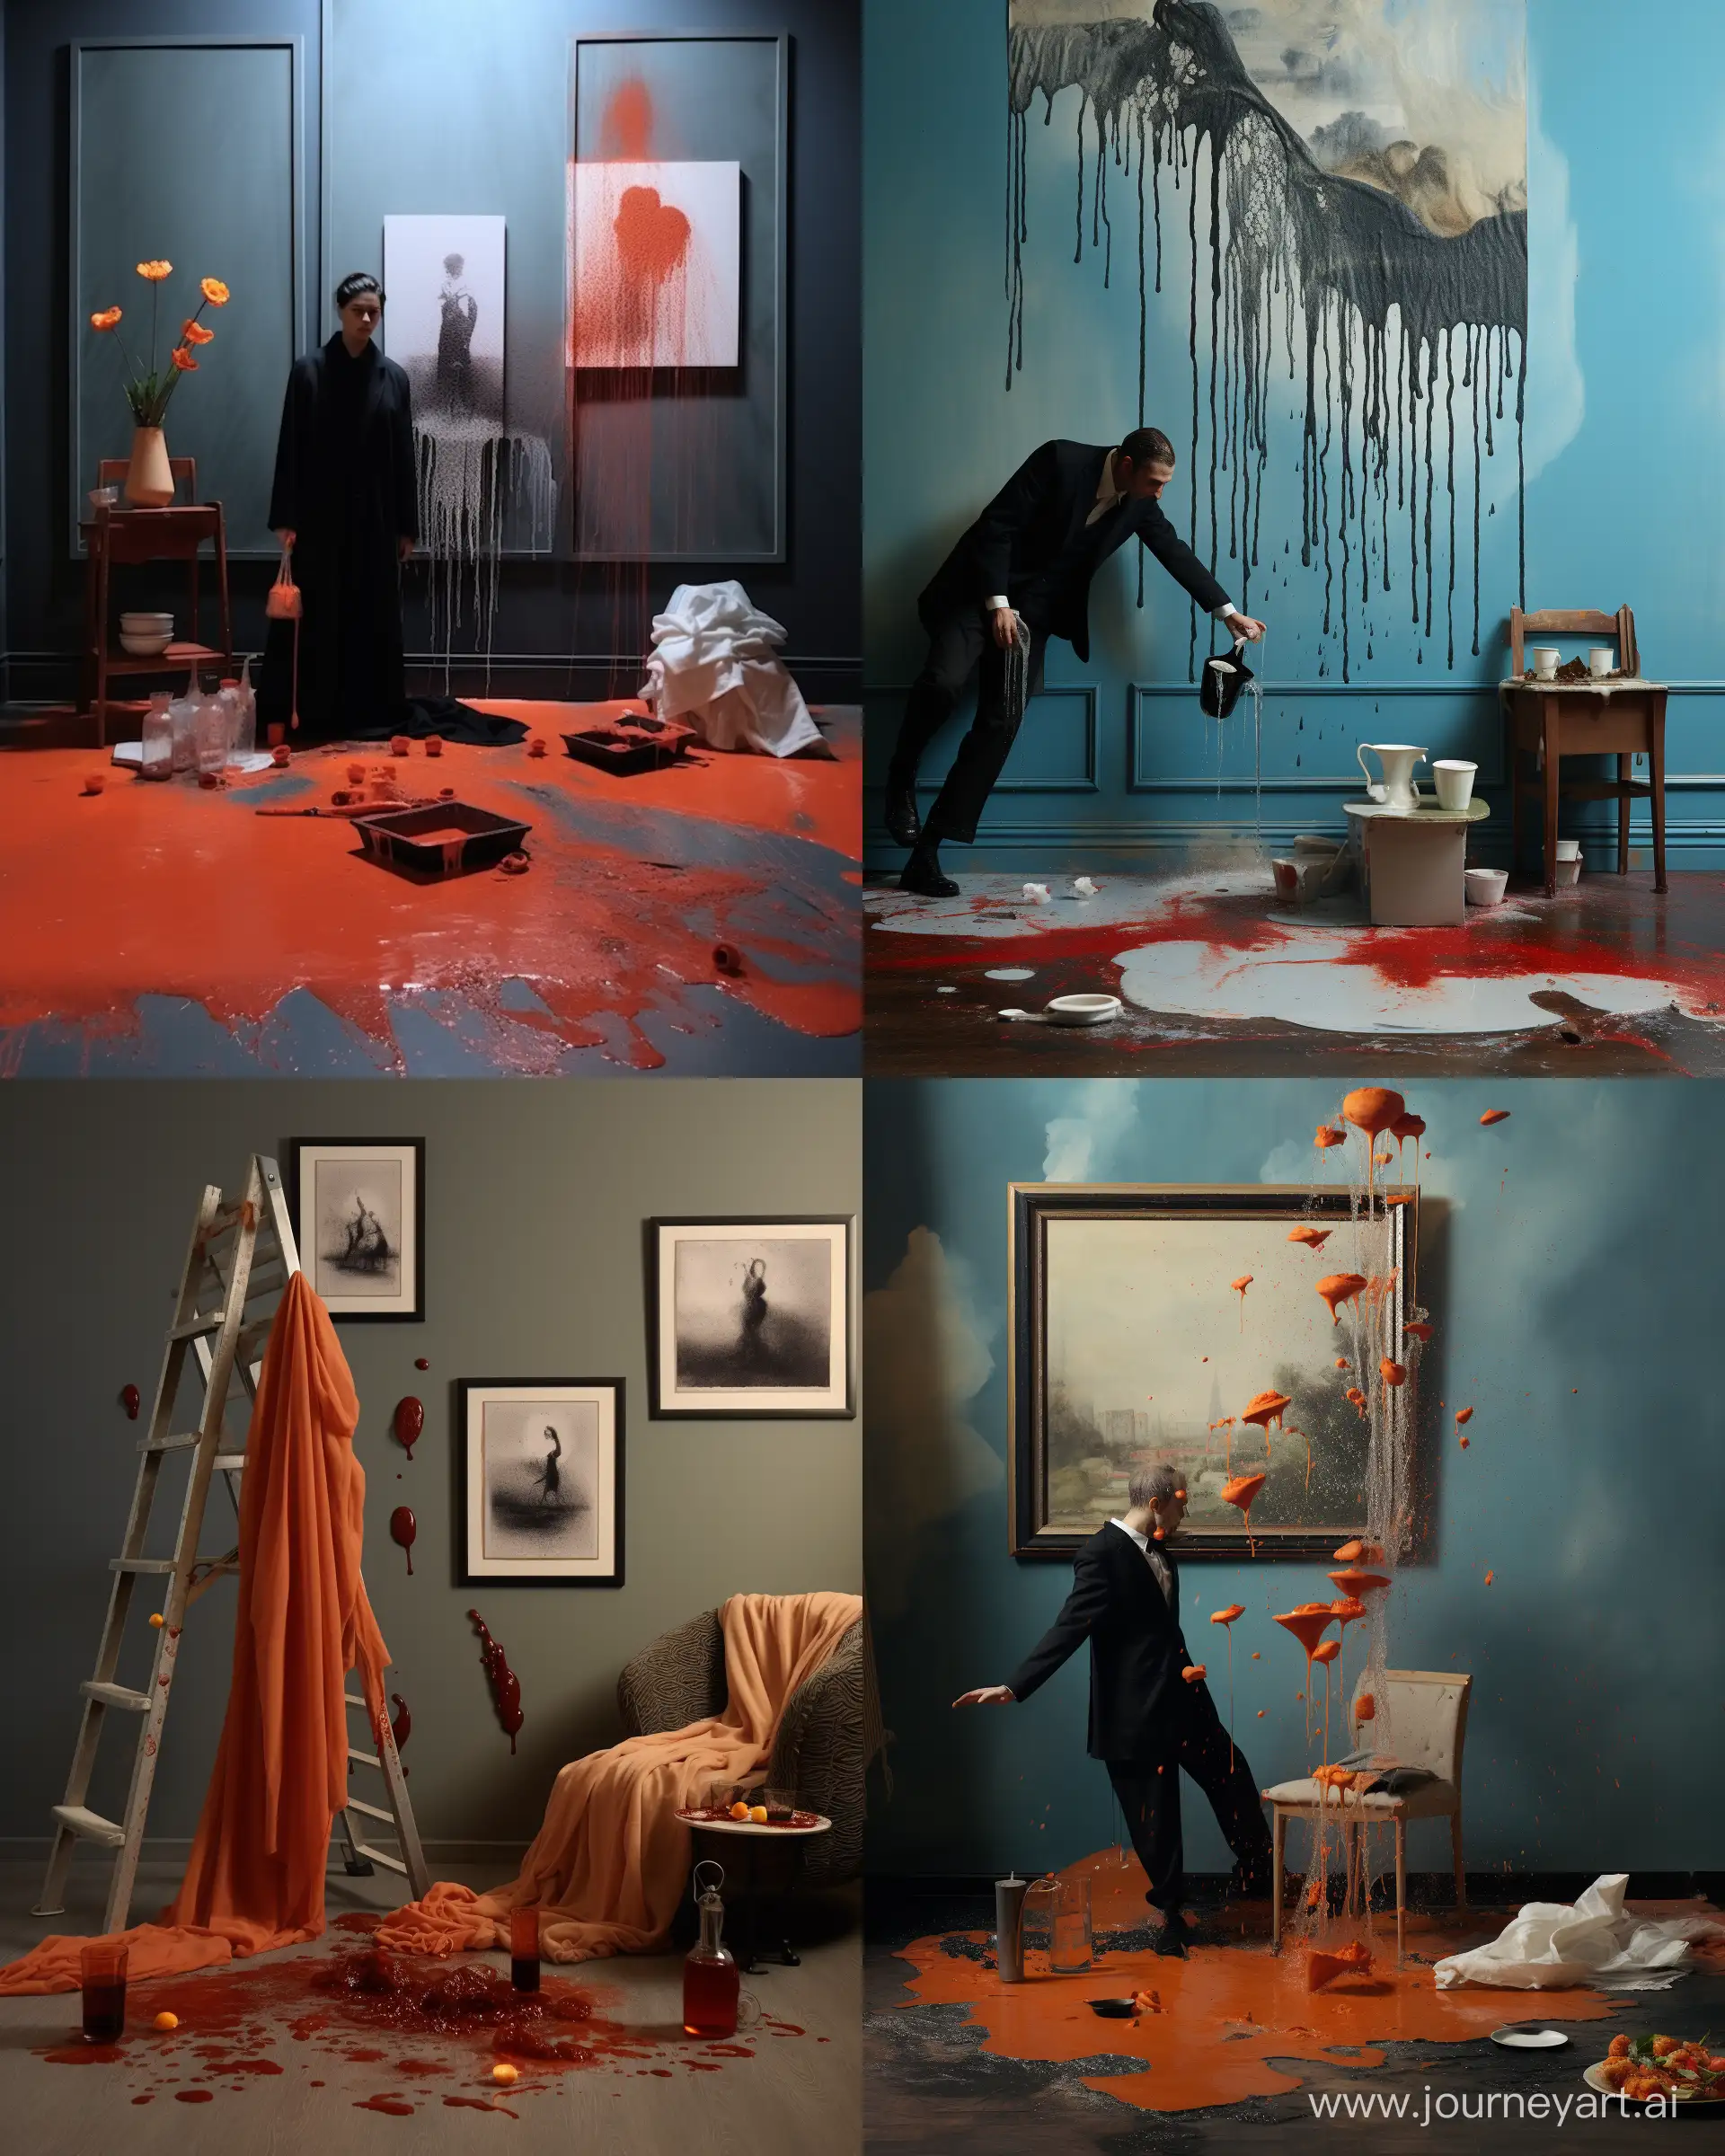 Surreal-Staged-Photography-Installation-Inspired-by-Francis-Bacon